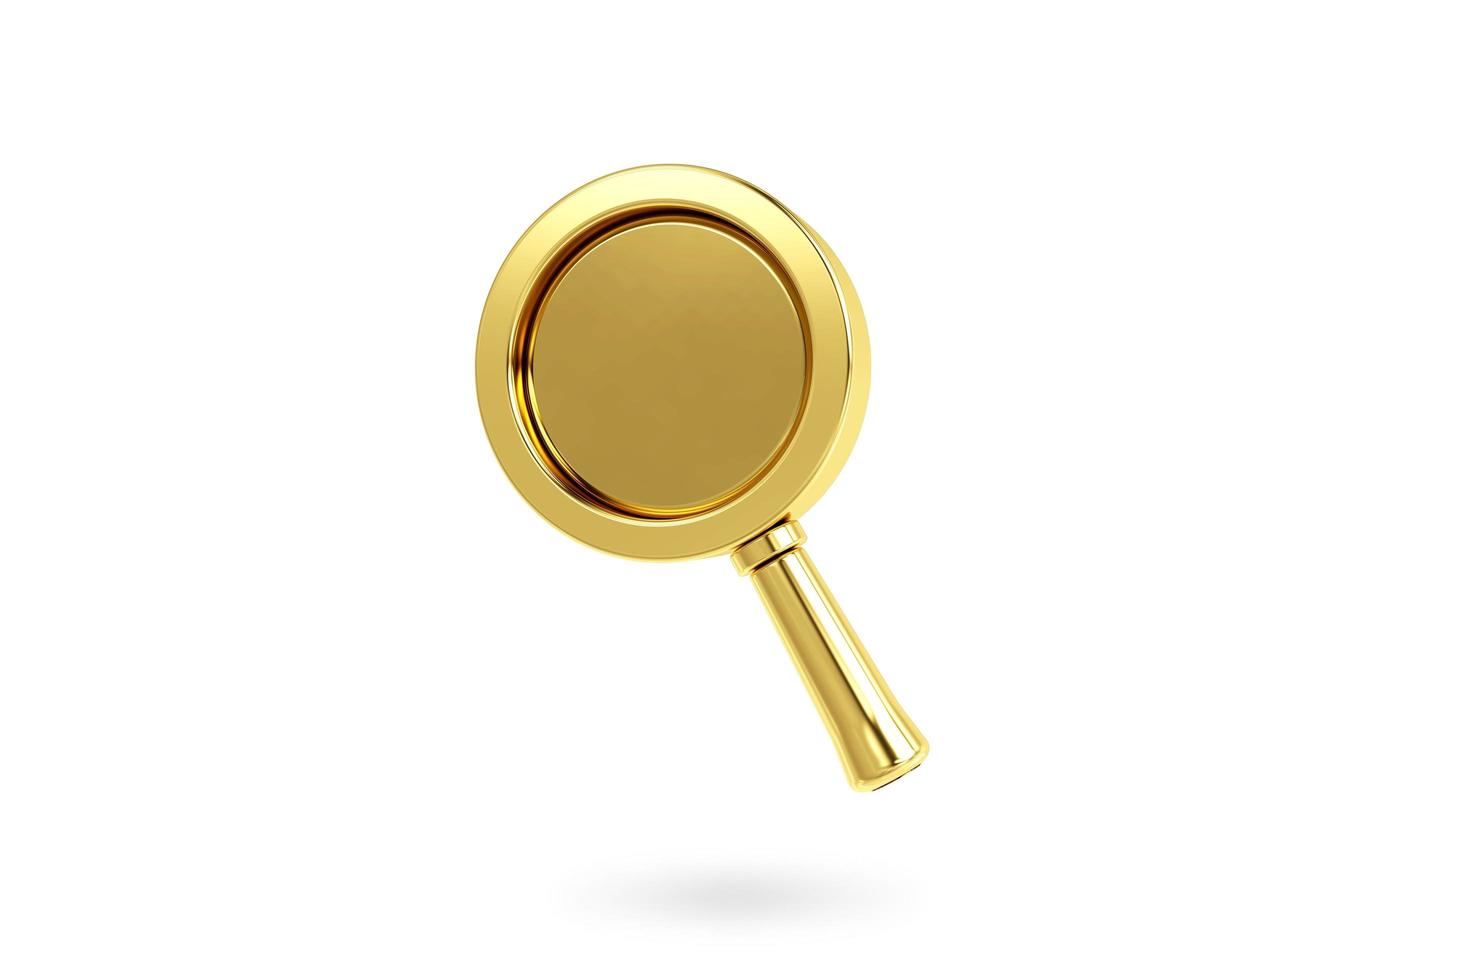 3d gold search Icon isolated on white background. Magnifying glass. Discovery, research, analysis concept. 3D rendering photo